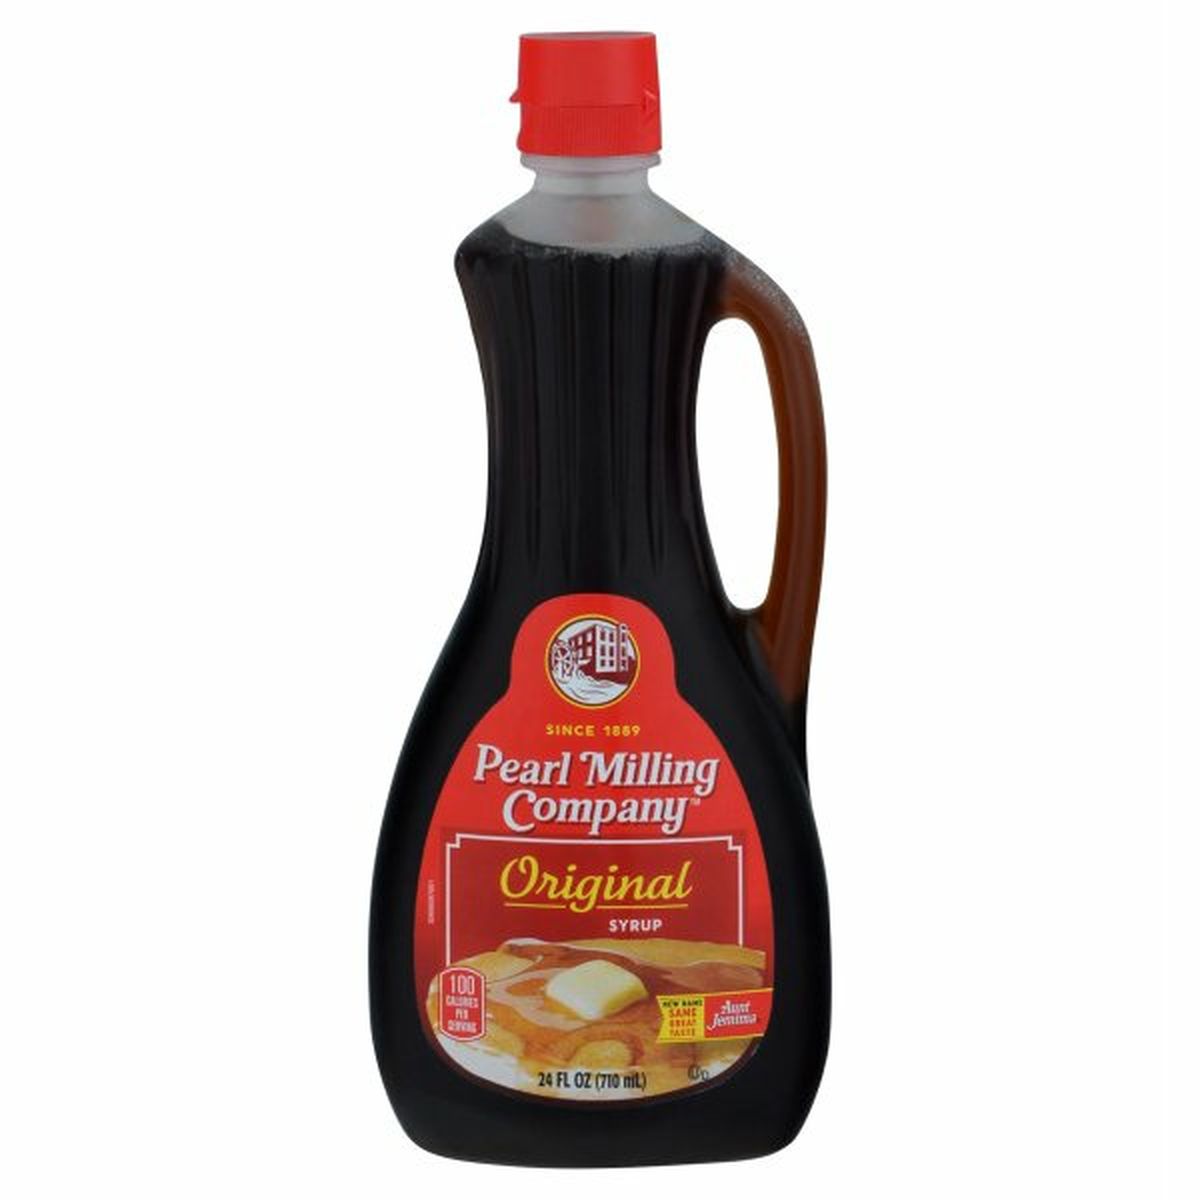 Calories in Pearl Milling Company Syrup, Original